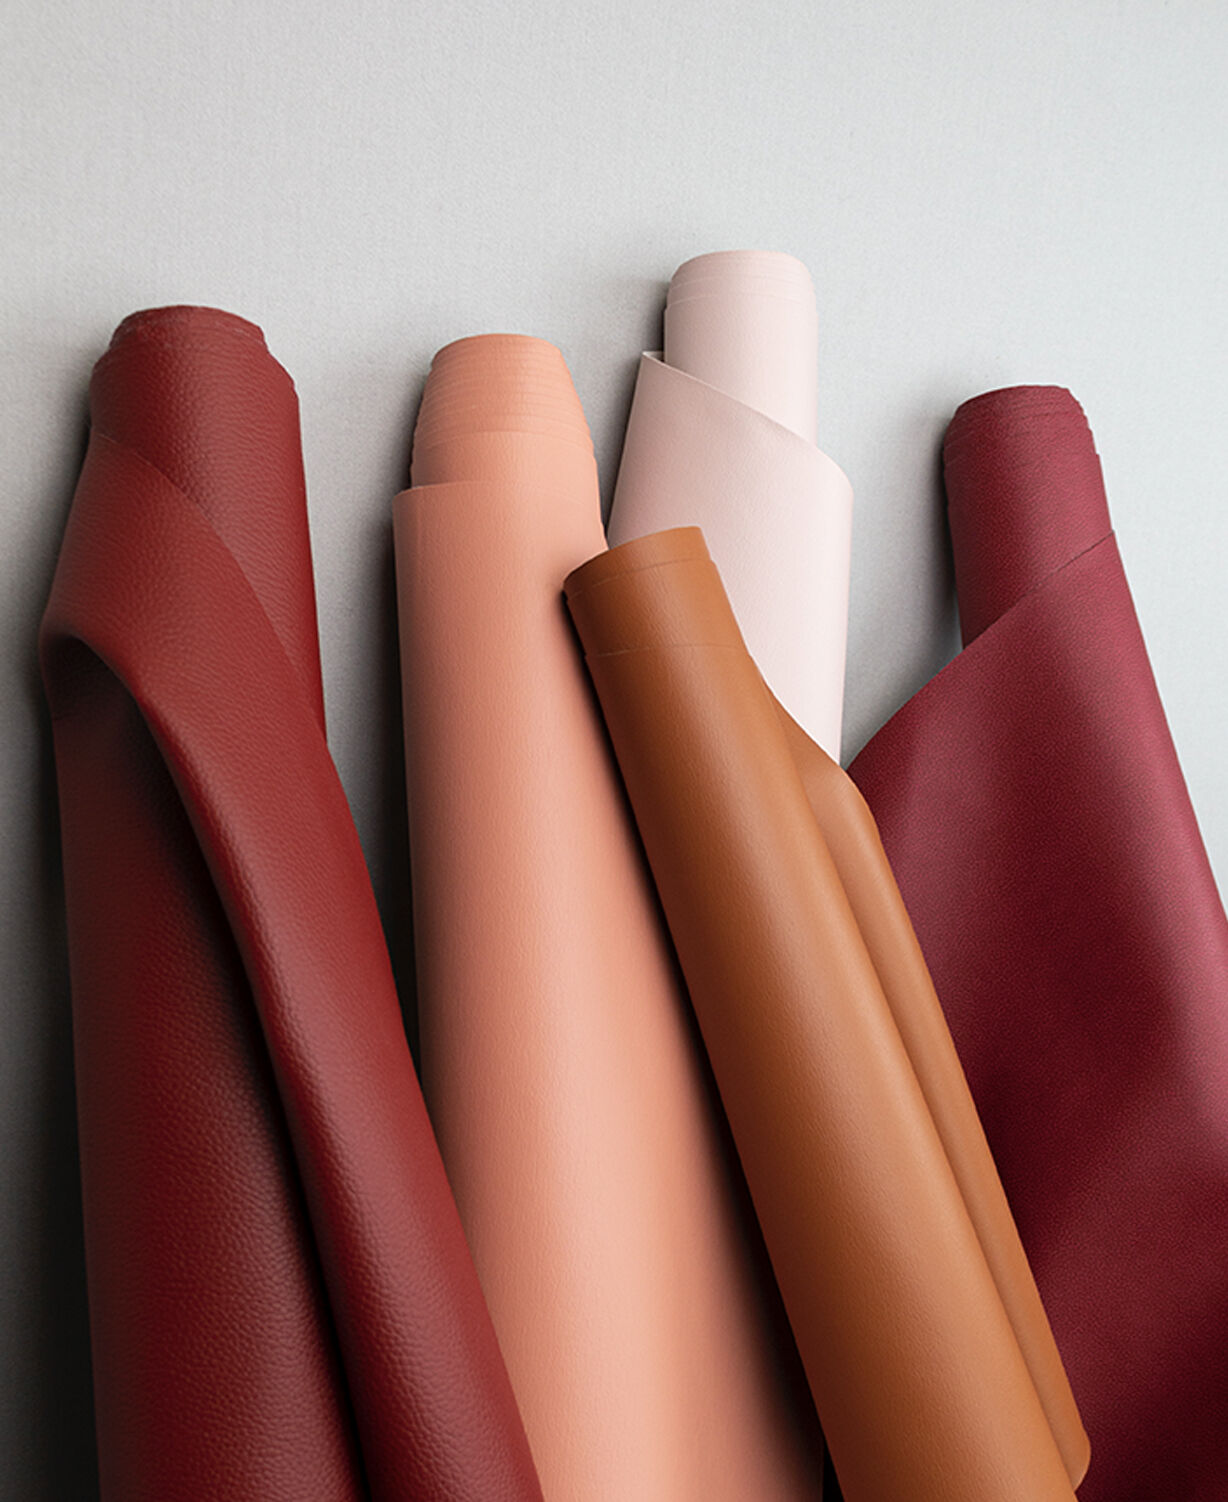 A red roll of fabric, a peach roll of fabric, an off-white roll of fabric, and a berry red roll of fabric lying next to each other with a tan roll of fabric on top.